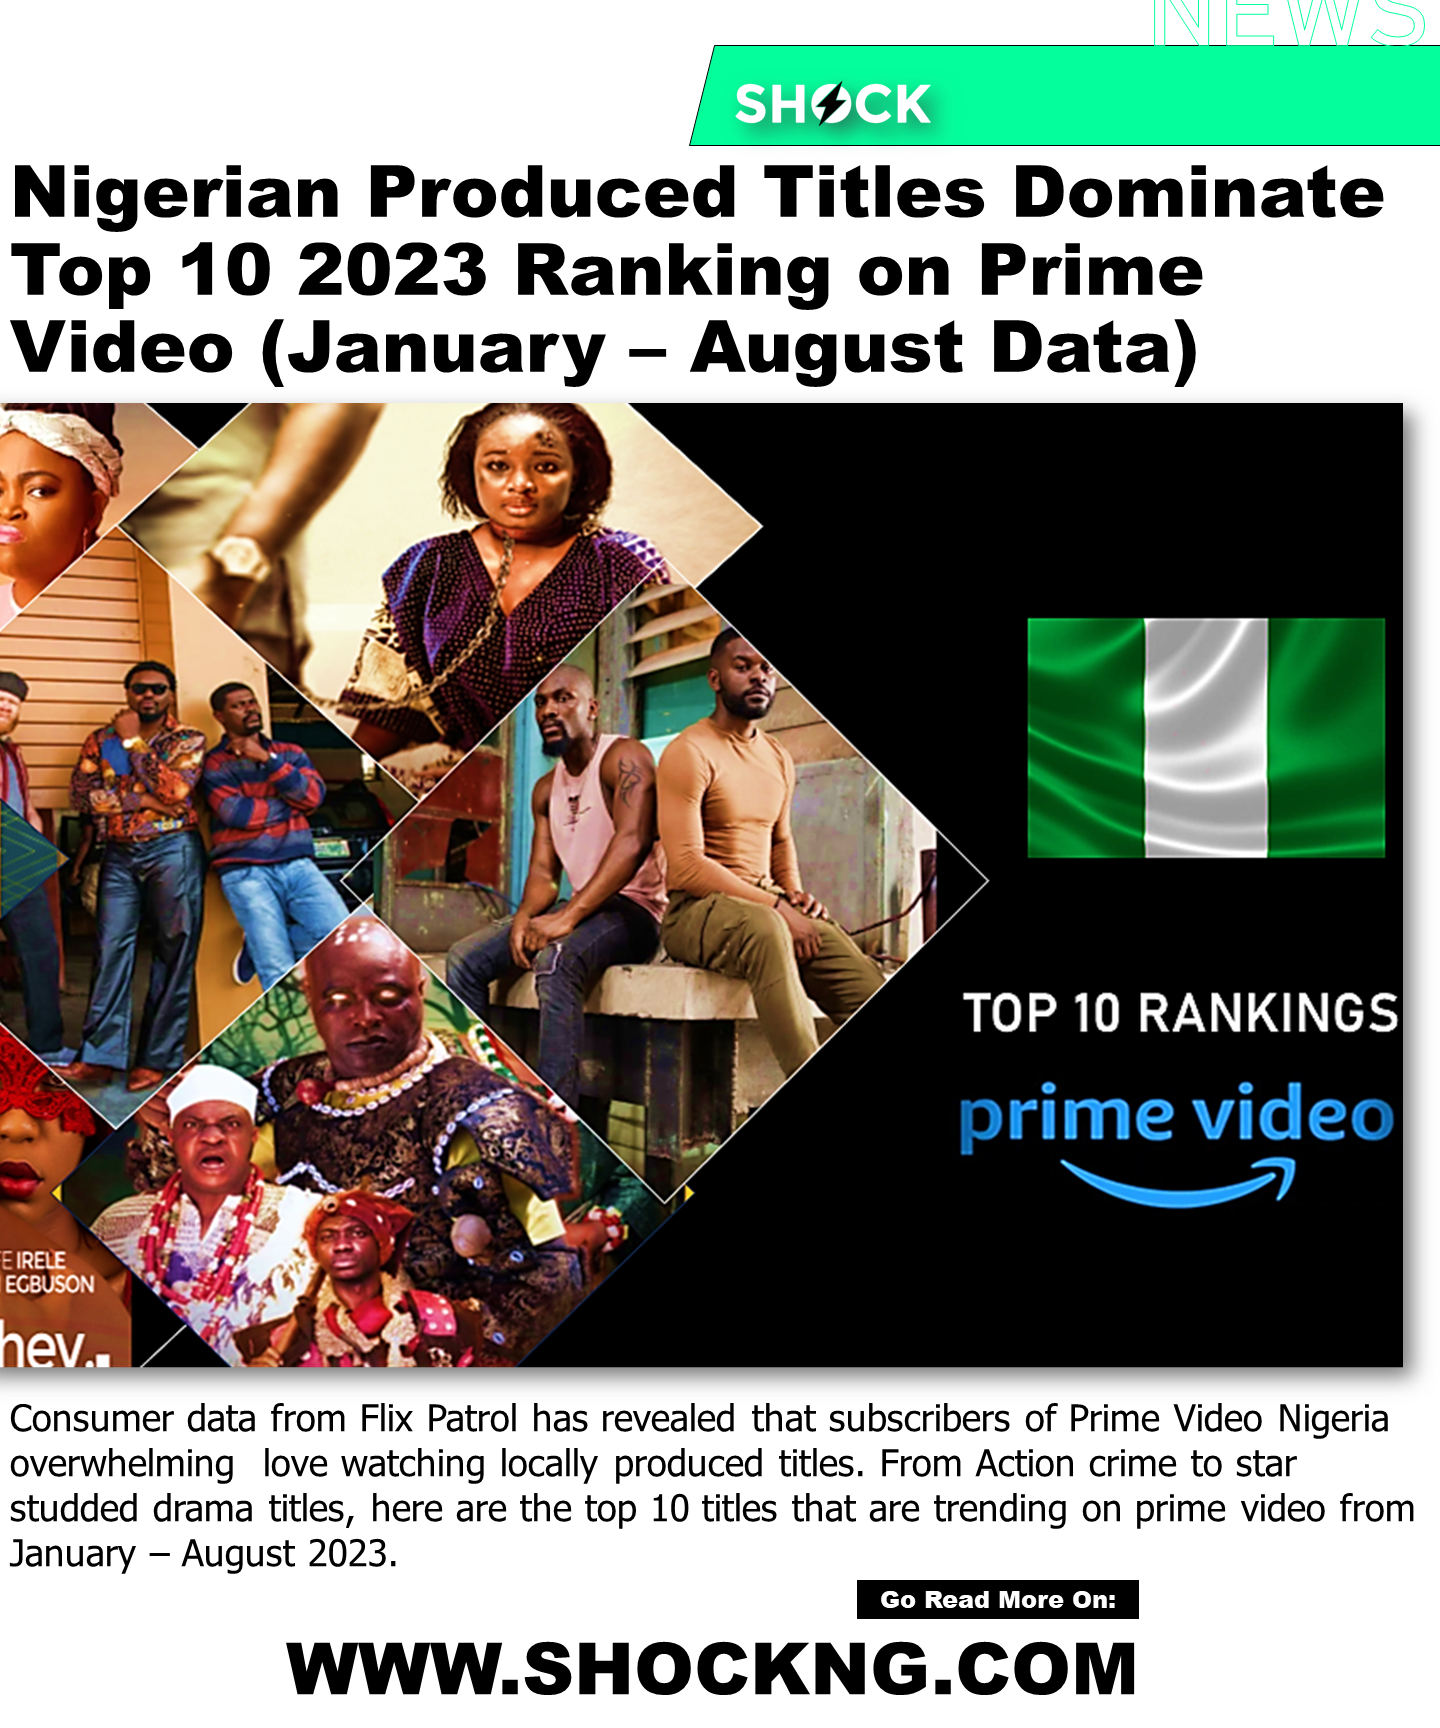 Top 10 Nollywood movies on prime video 2023 - Nigerian Movie Titles Dominate Top 10 2023 Ranking on Prime Video